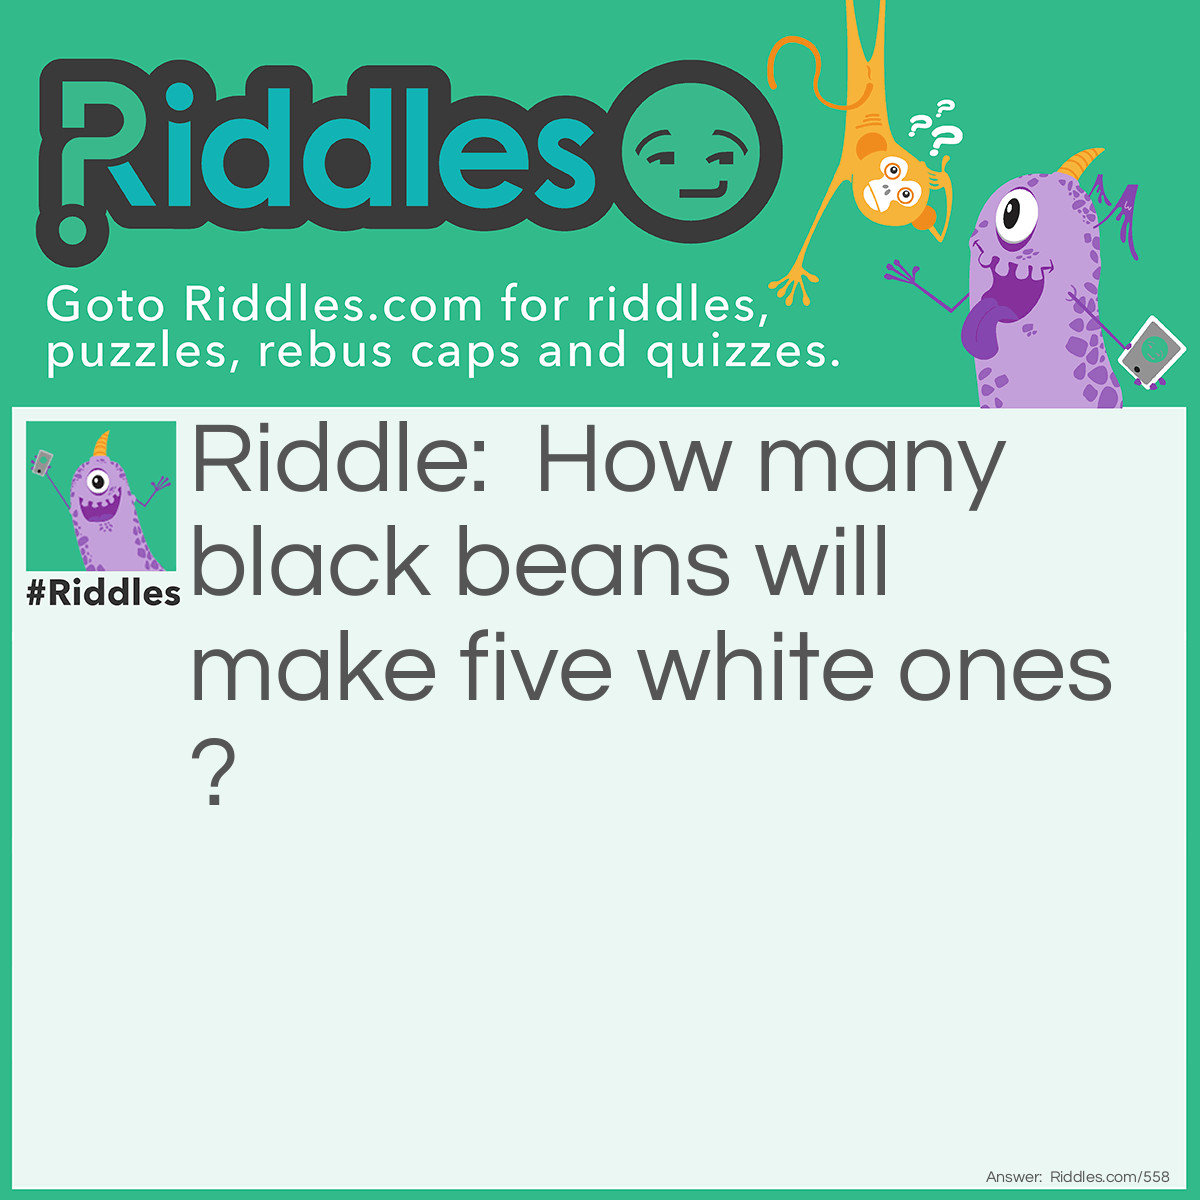 Riddle: How many black beans will make five white ones? Answer: Five when peeled.